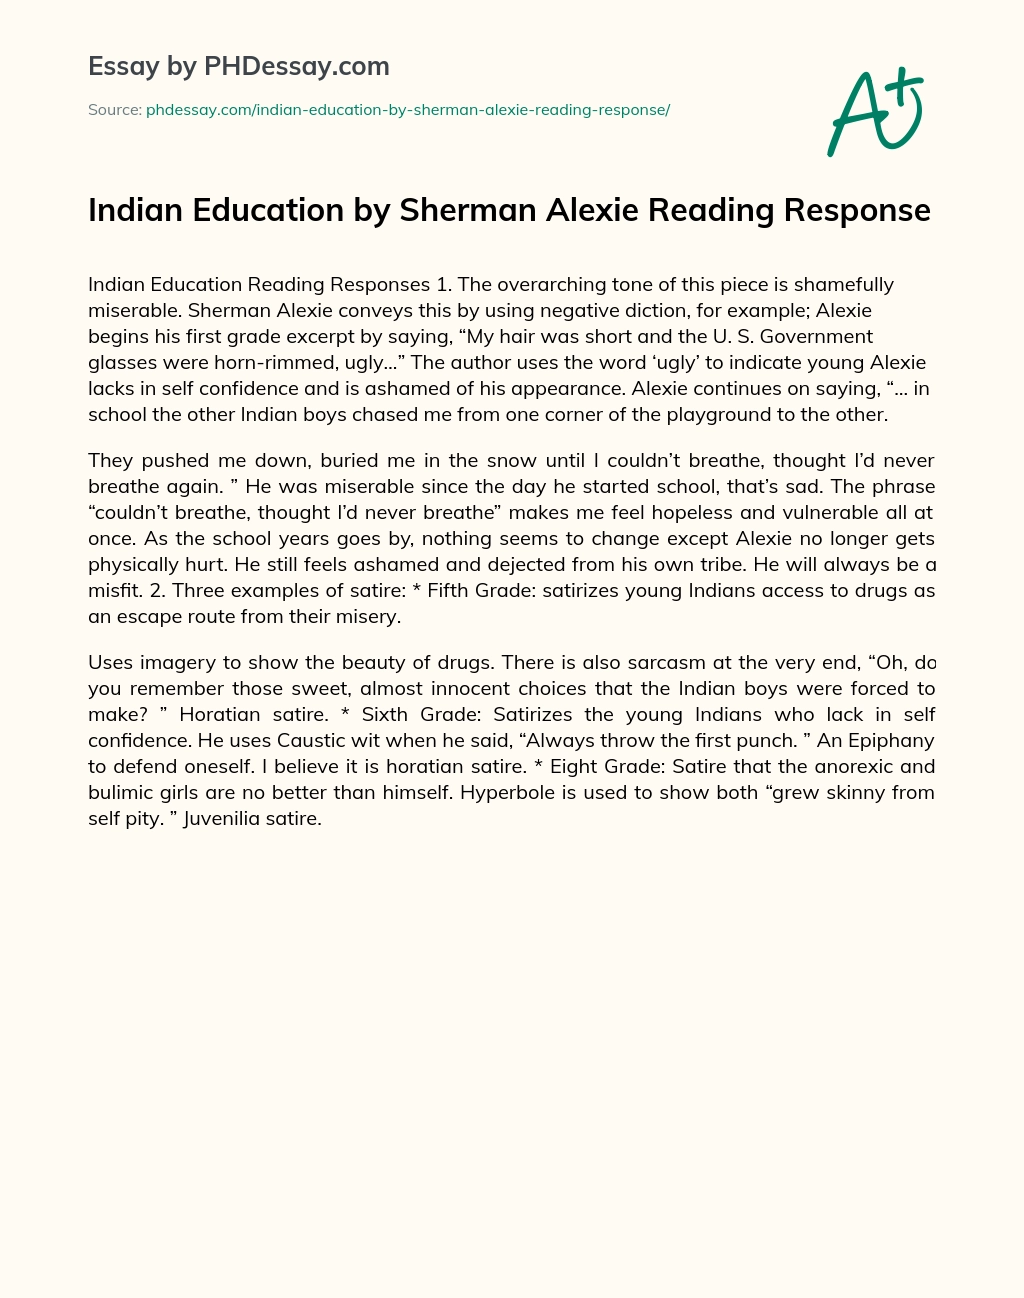 Indian Education by Sherman Alexie Reading Response essay